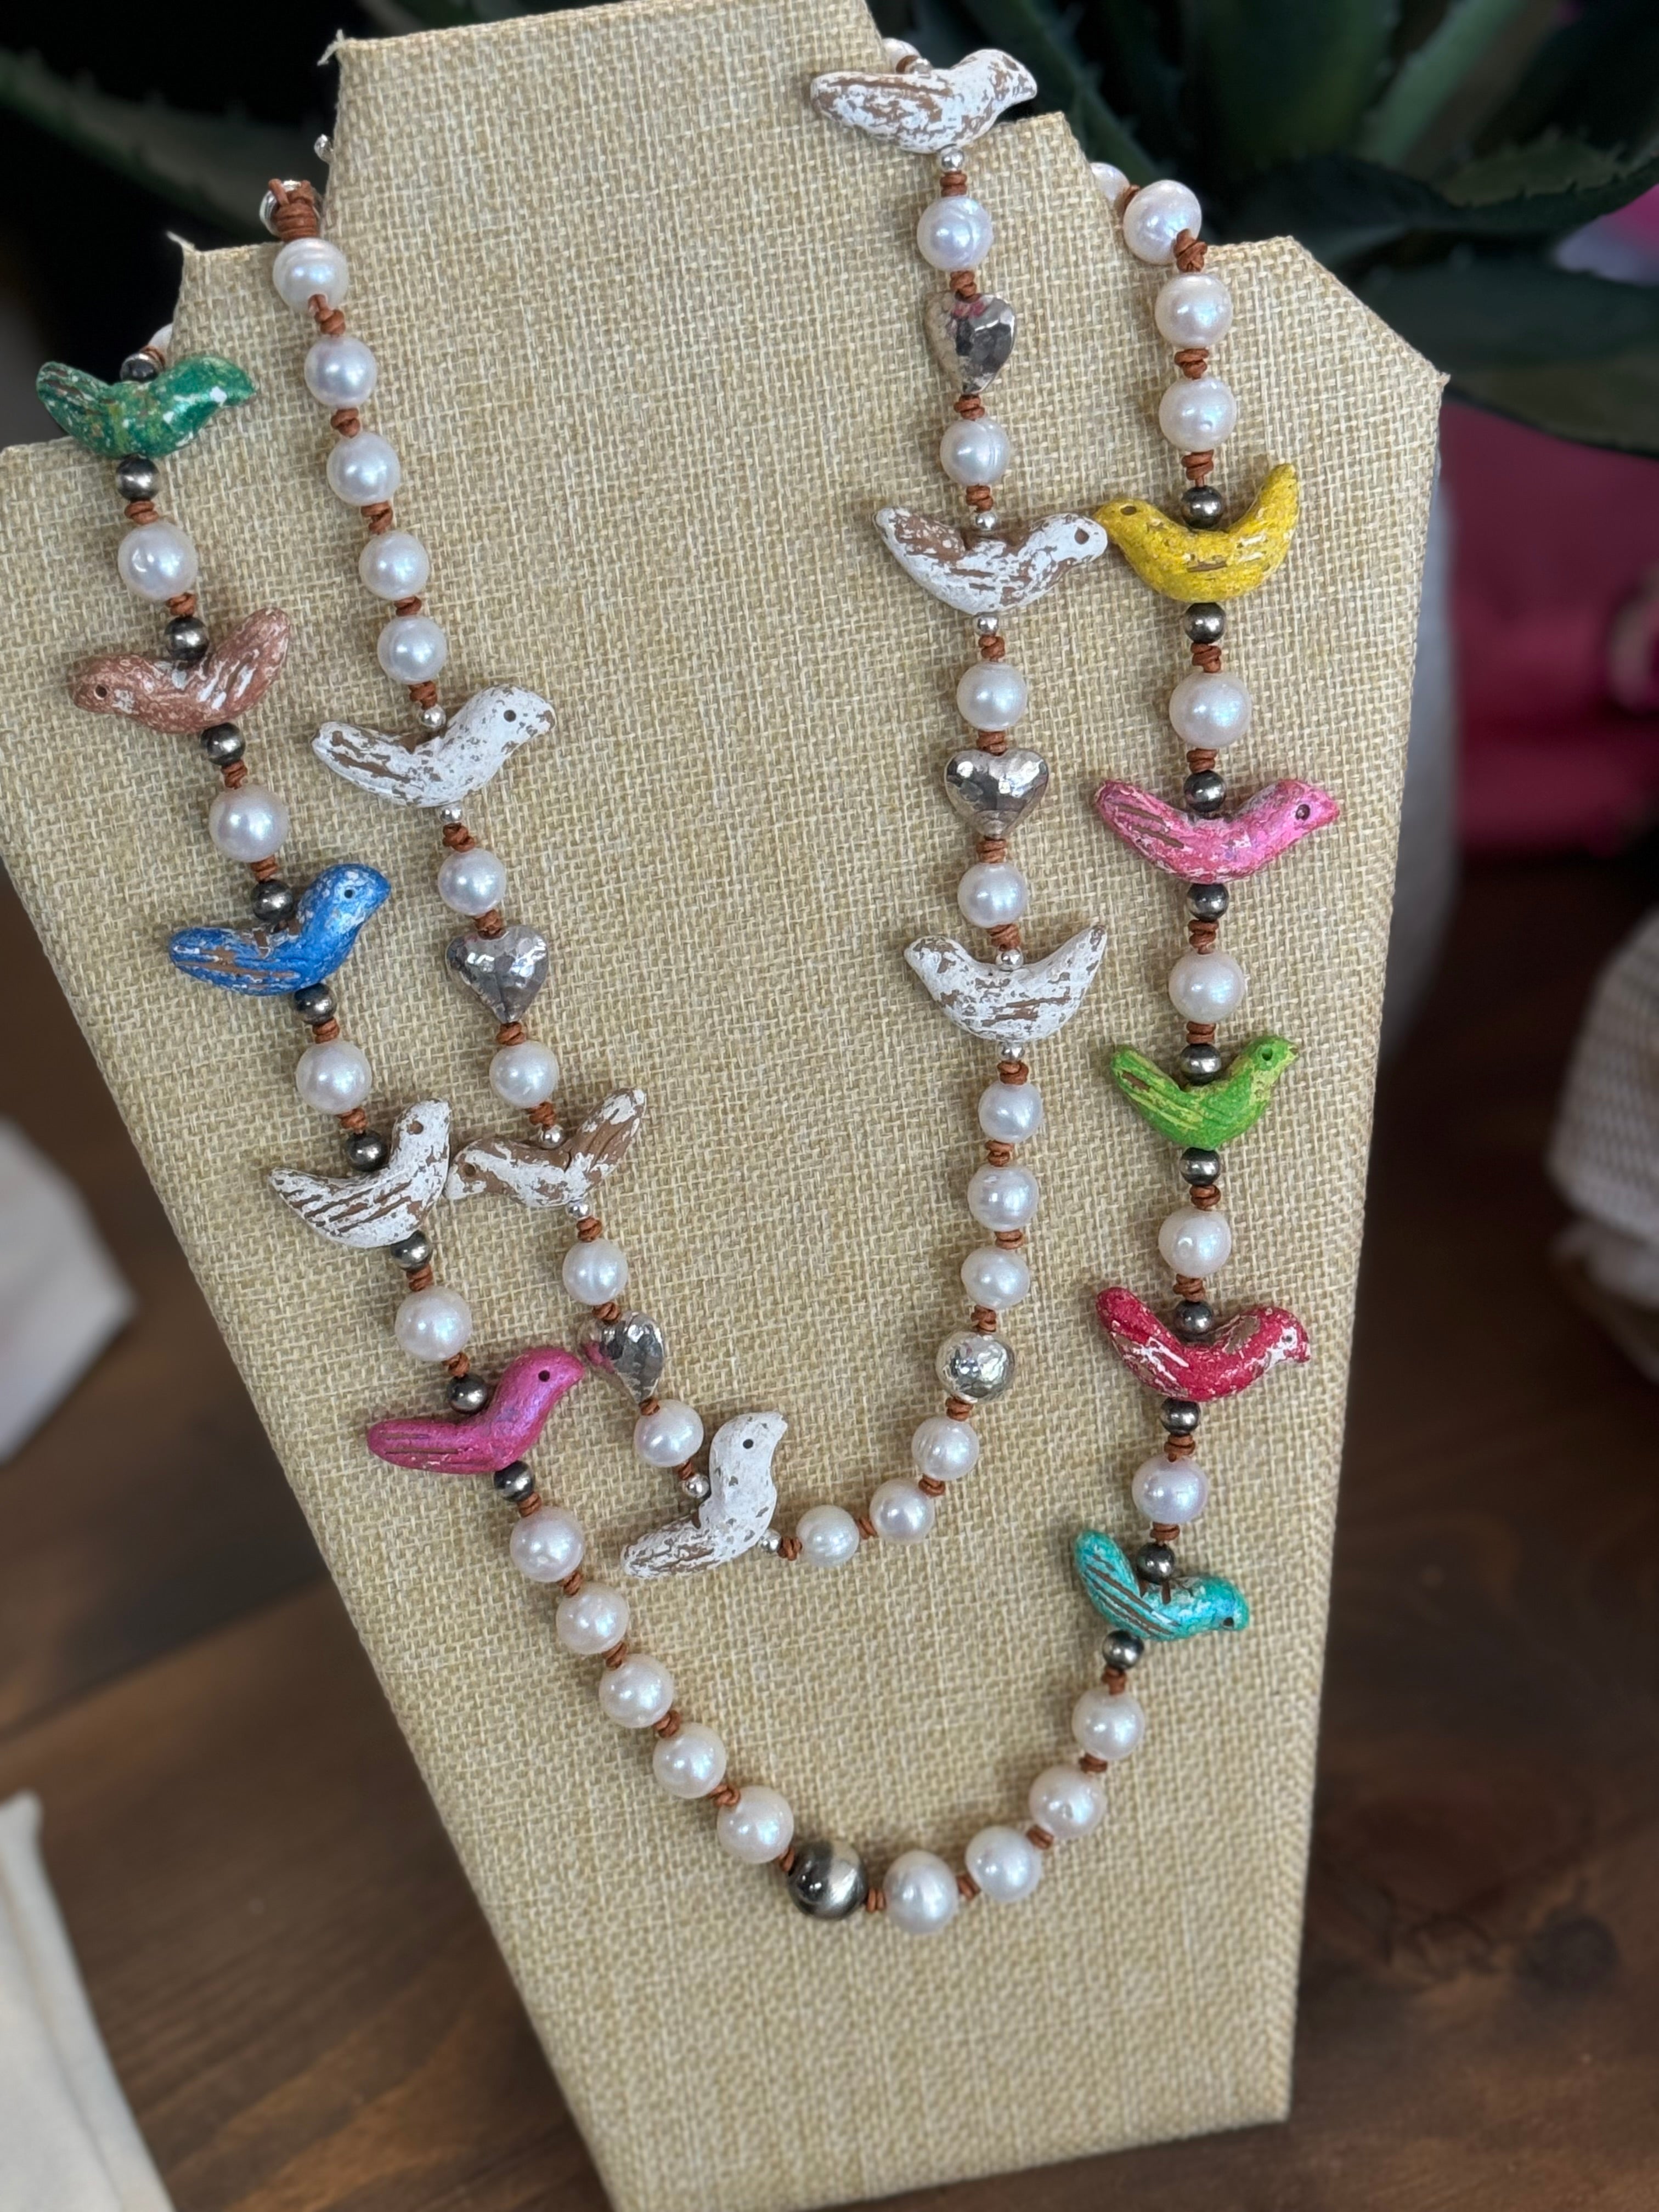 Birds and Pearls